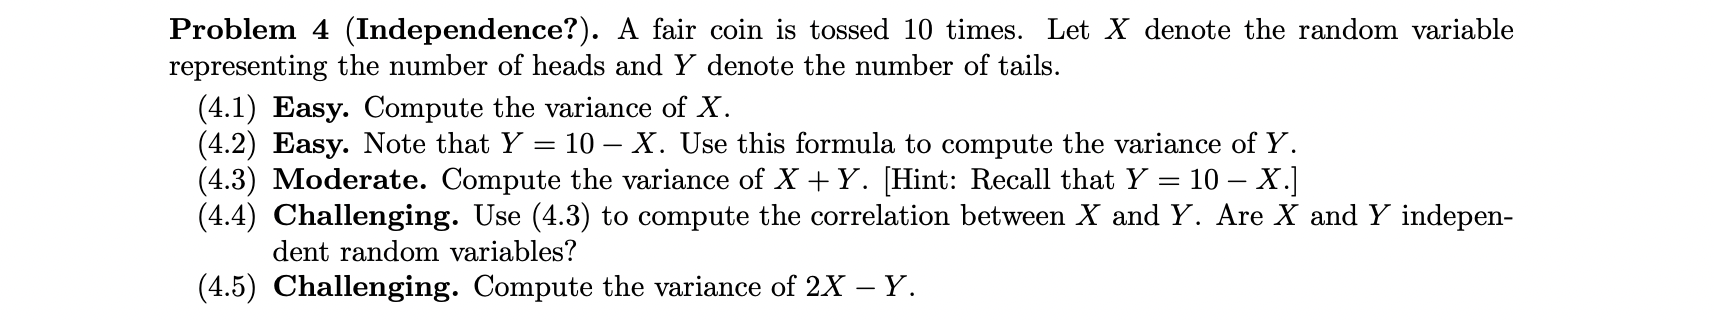 Problem 4 Independence A Fair Coin Is Tossed 10 Times Let X Denote The Random Variable Representing The Number Of H 1